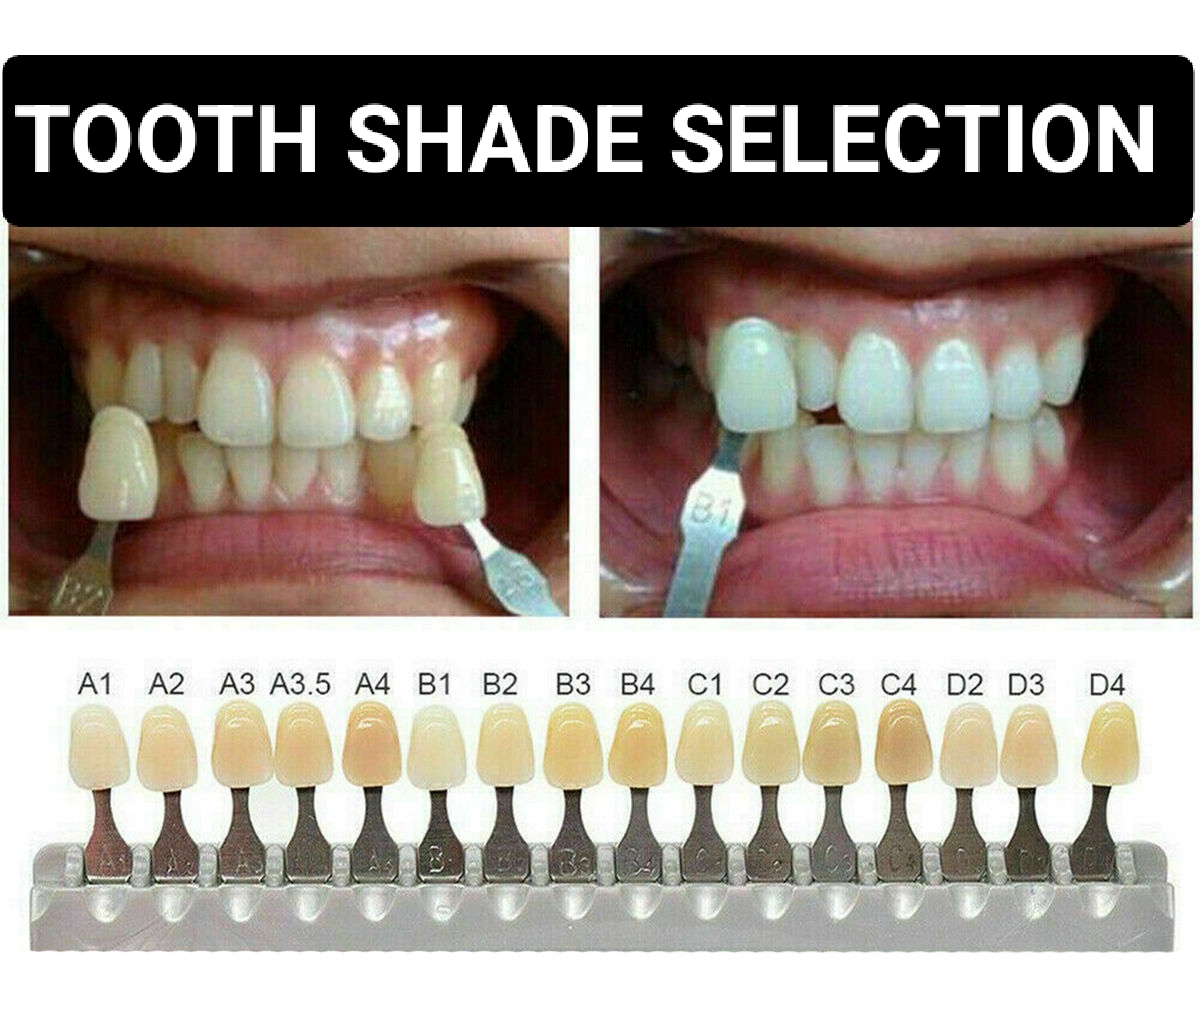 TOOTH SHADE